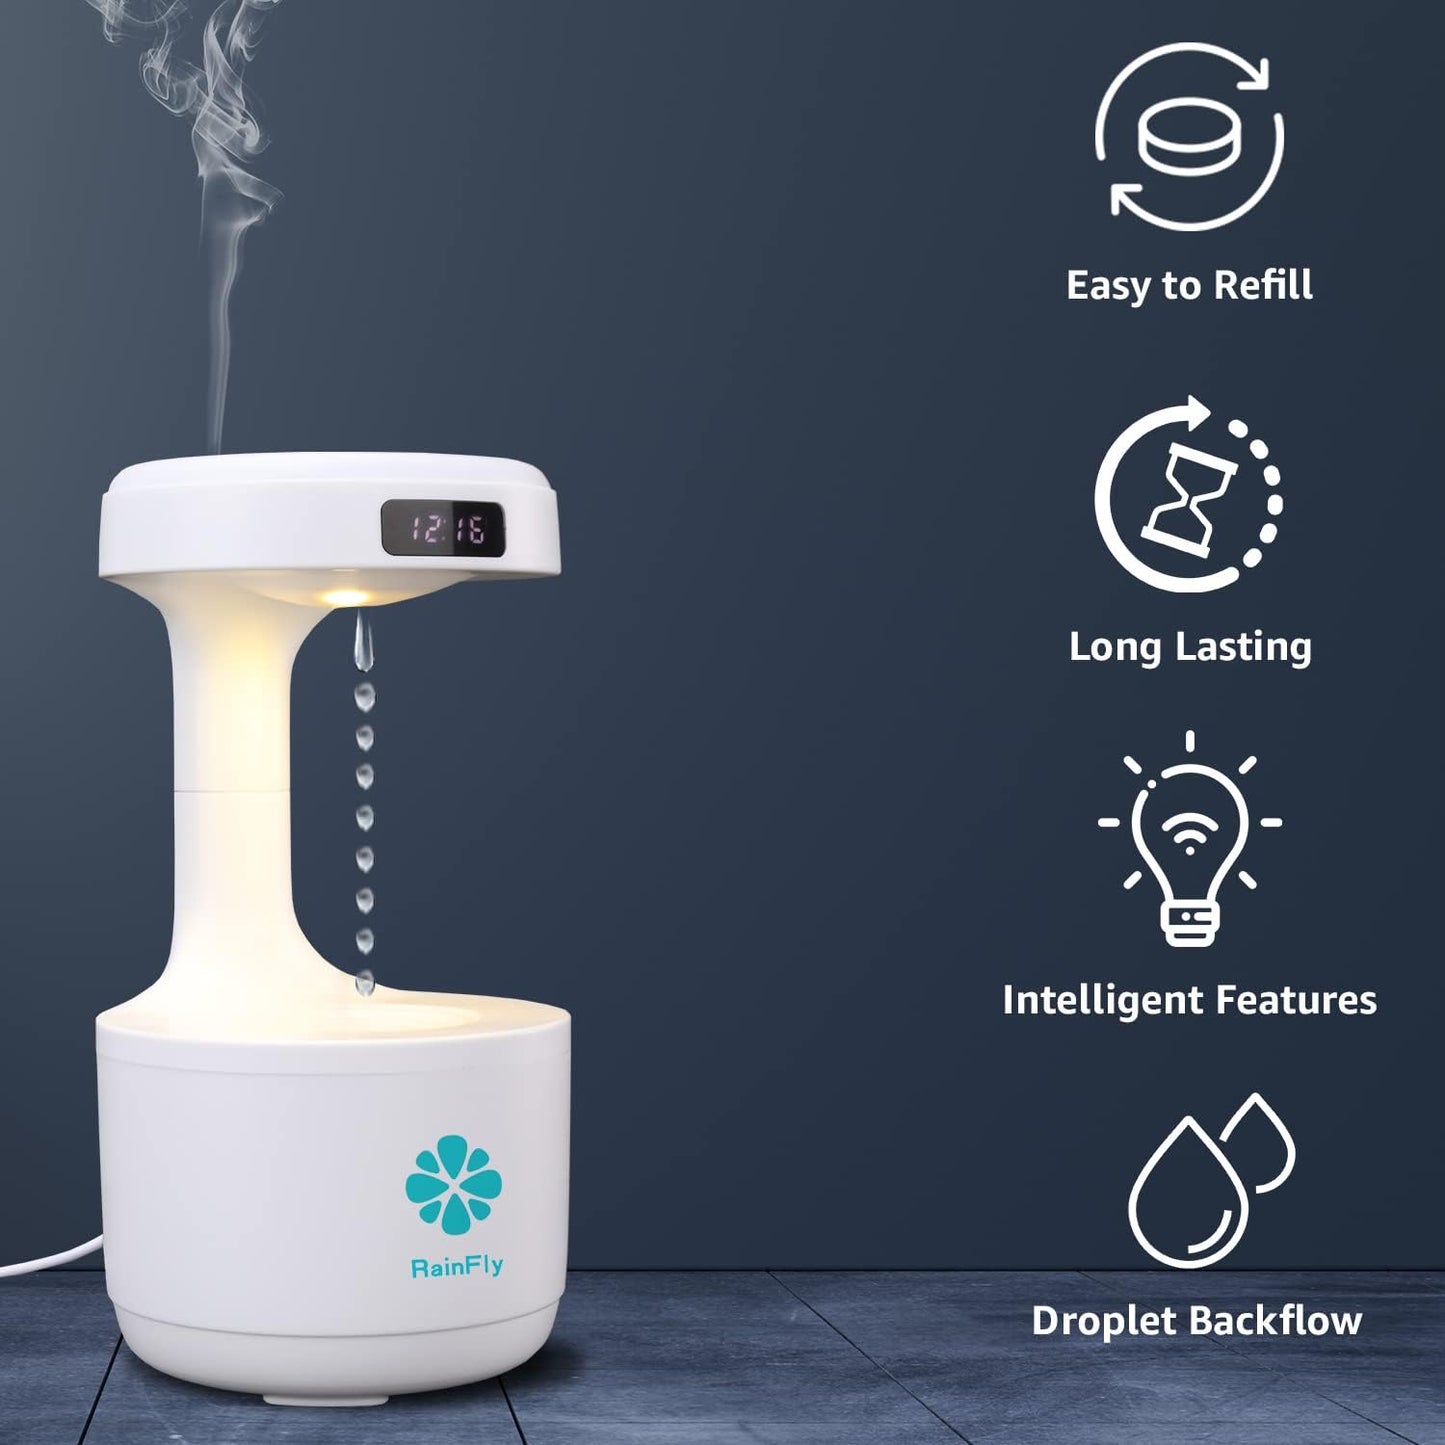 COOL MIST HUMIDIFIER FOR BEDROOM, CUTE HUMIDIFIER WITH ANTI-GRAVITY HUMIDIFIER, CHARGER INCLUDED, CHARGE ON 5V/2A OR GREATER WATTS SPORTED, 800ML WATER TANK (WHITE)